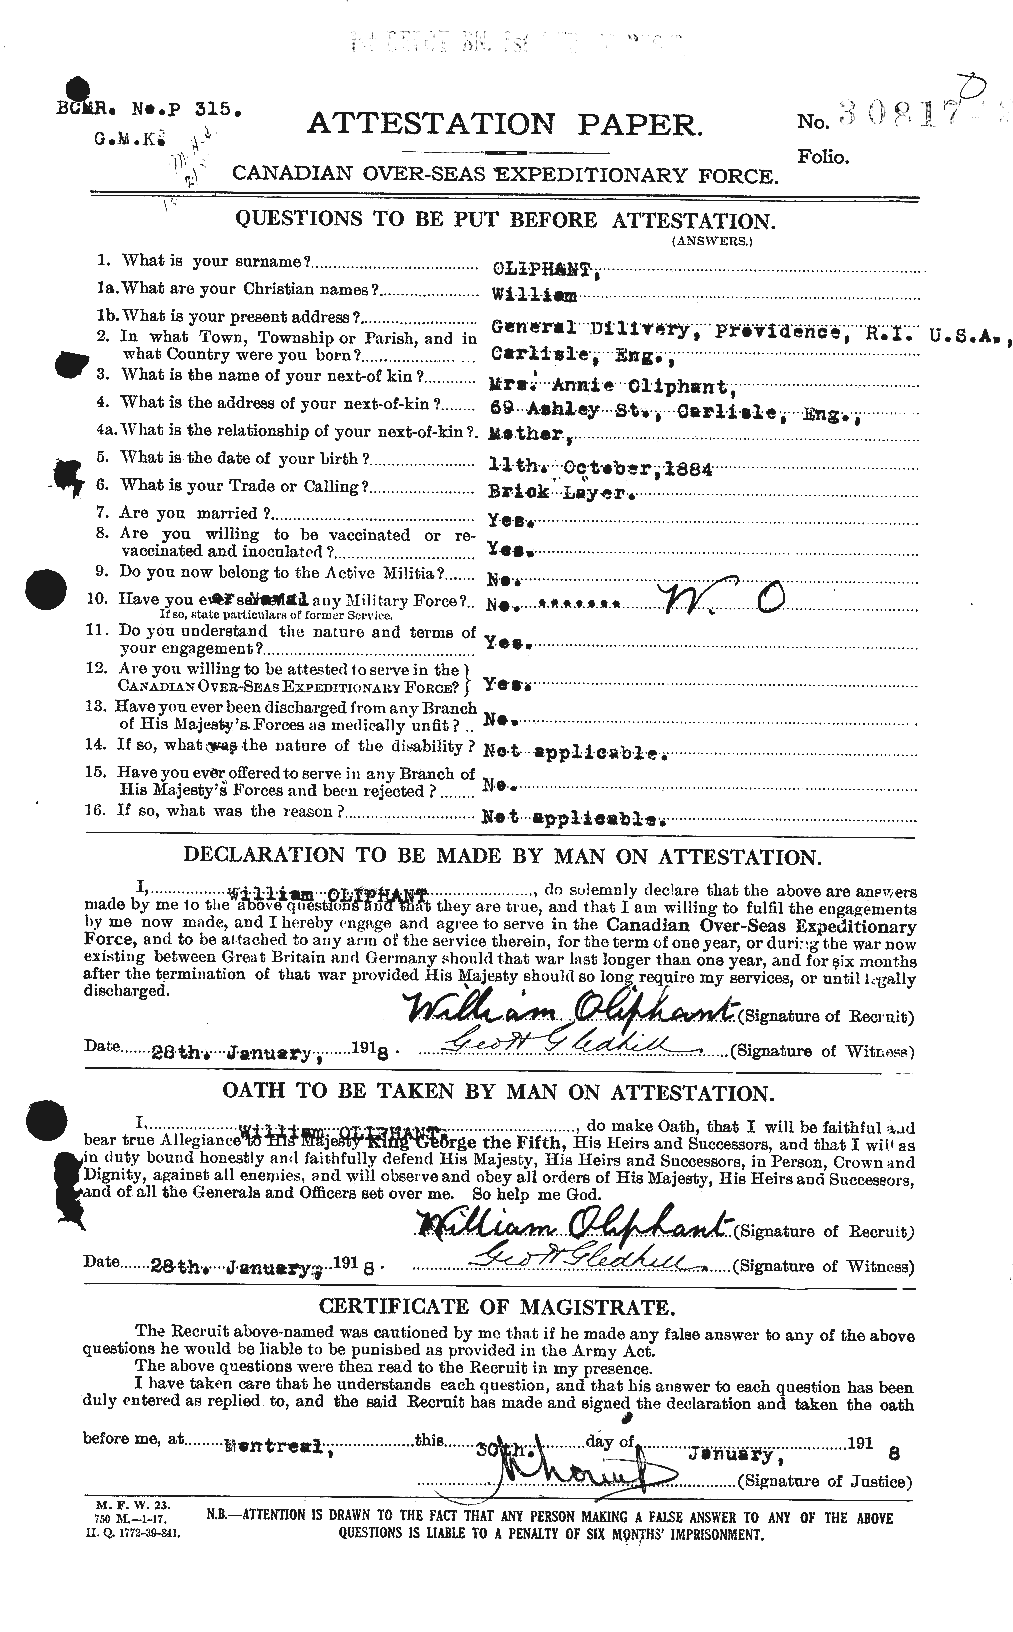 Personnel Records of the First World War - CEF 557068a